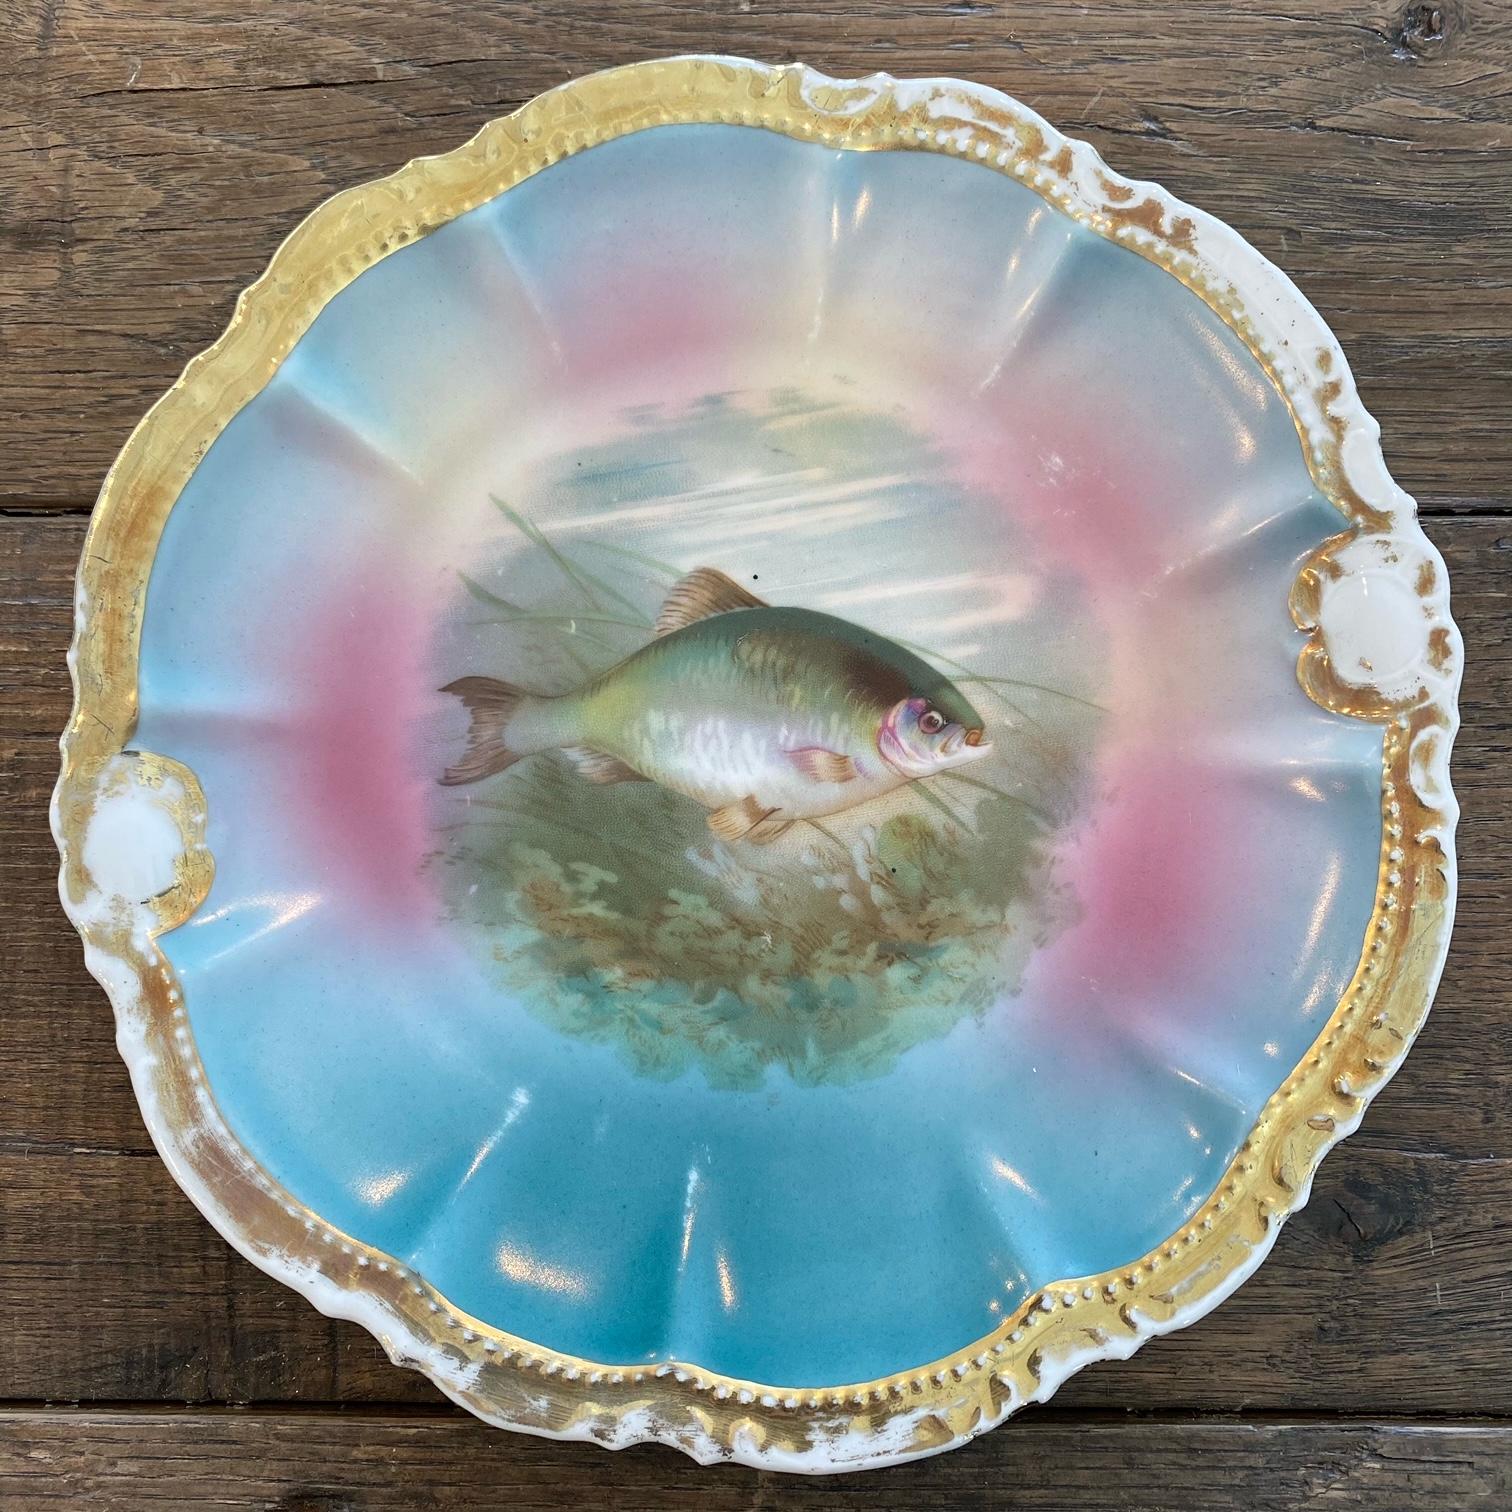 A vibrant set of 12 hand painted gold gilt fish plates with matching large platter and gravy or sauce boat. Each plate is beautifully shaped and accented with 24 karat gold, hand painted with a variety of fish and fauna. Marvelous color palette of